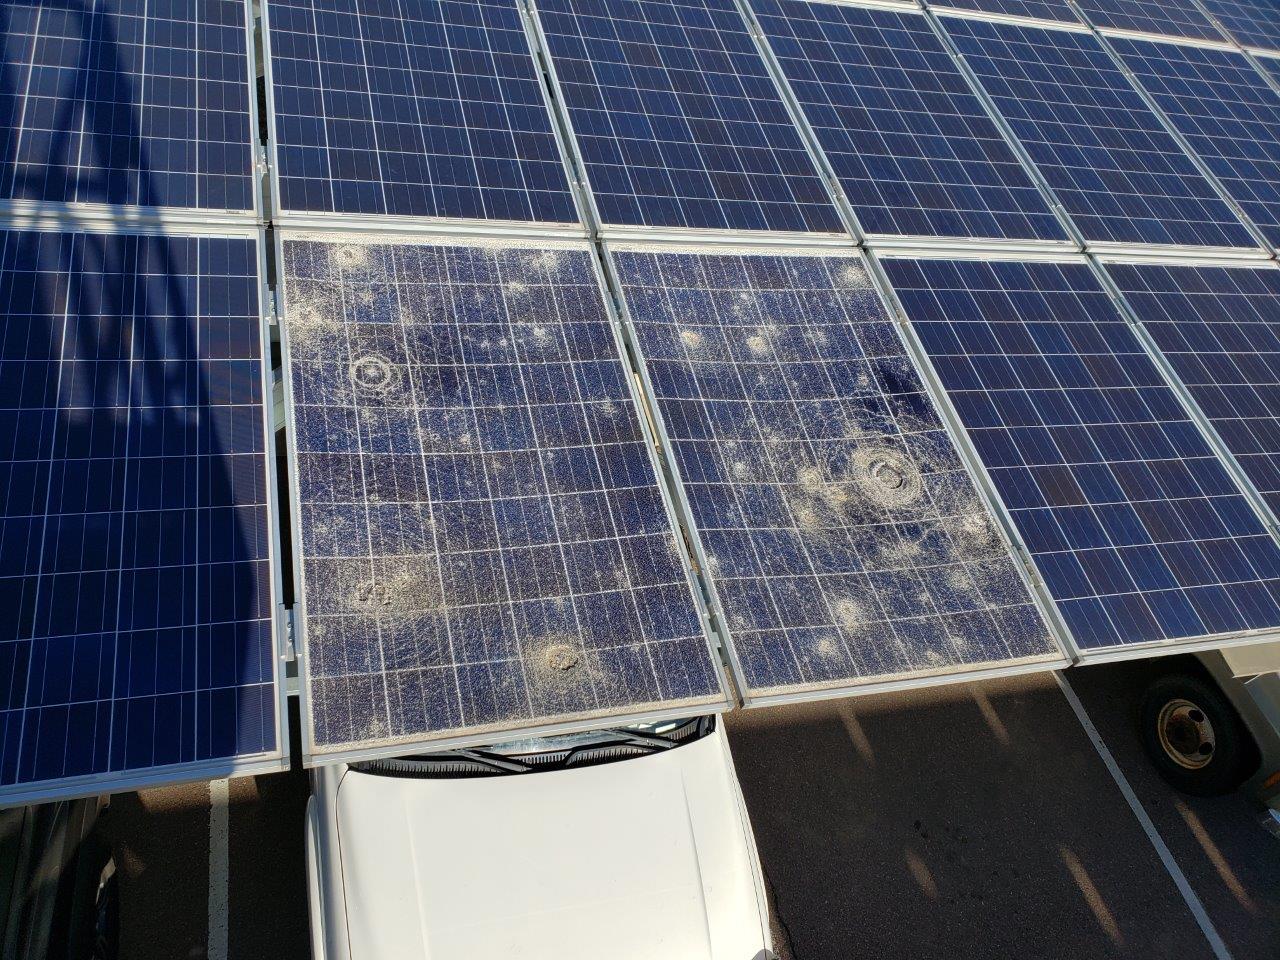 Several modules were damaged by hail on one of many carport arrays on the base.